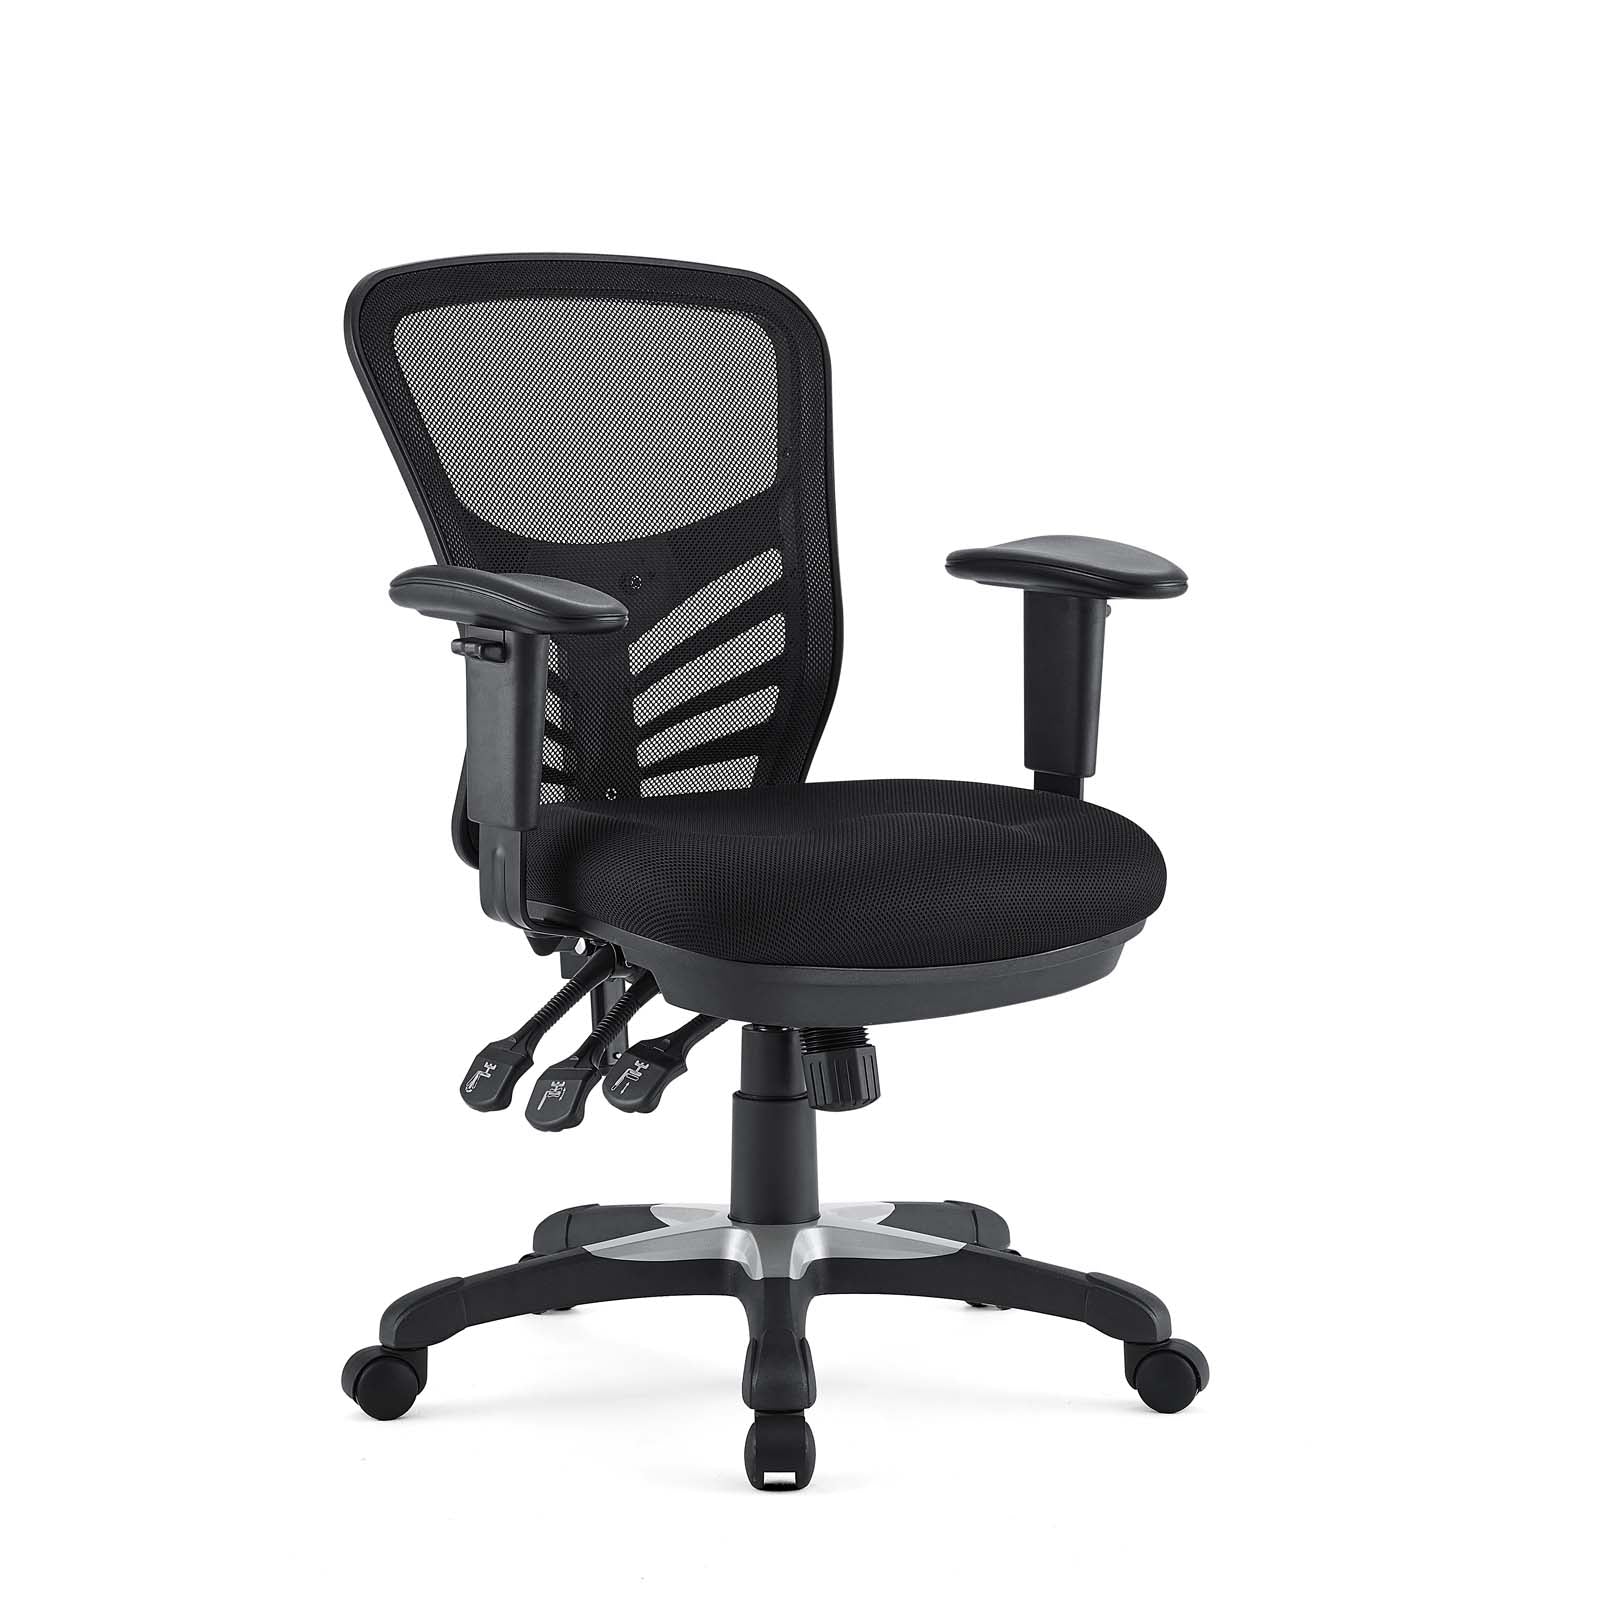 Stay Active with Articulate Mesh Office Chair | BUILDMyplace